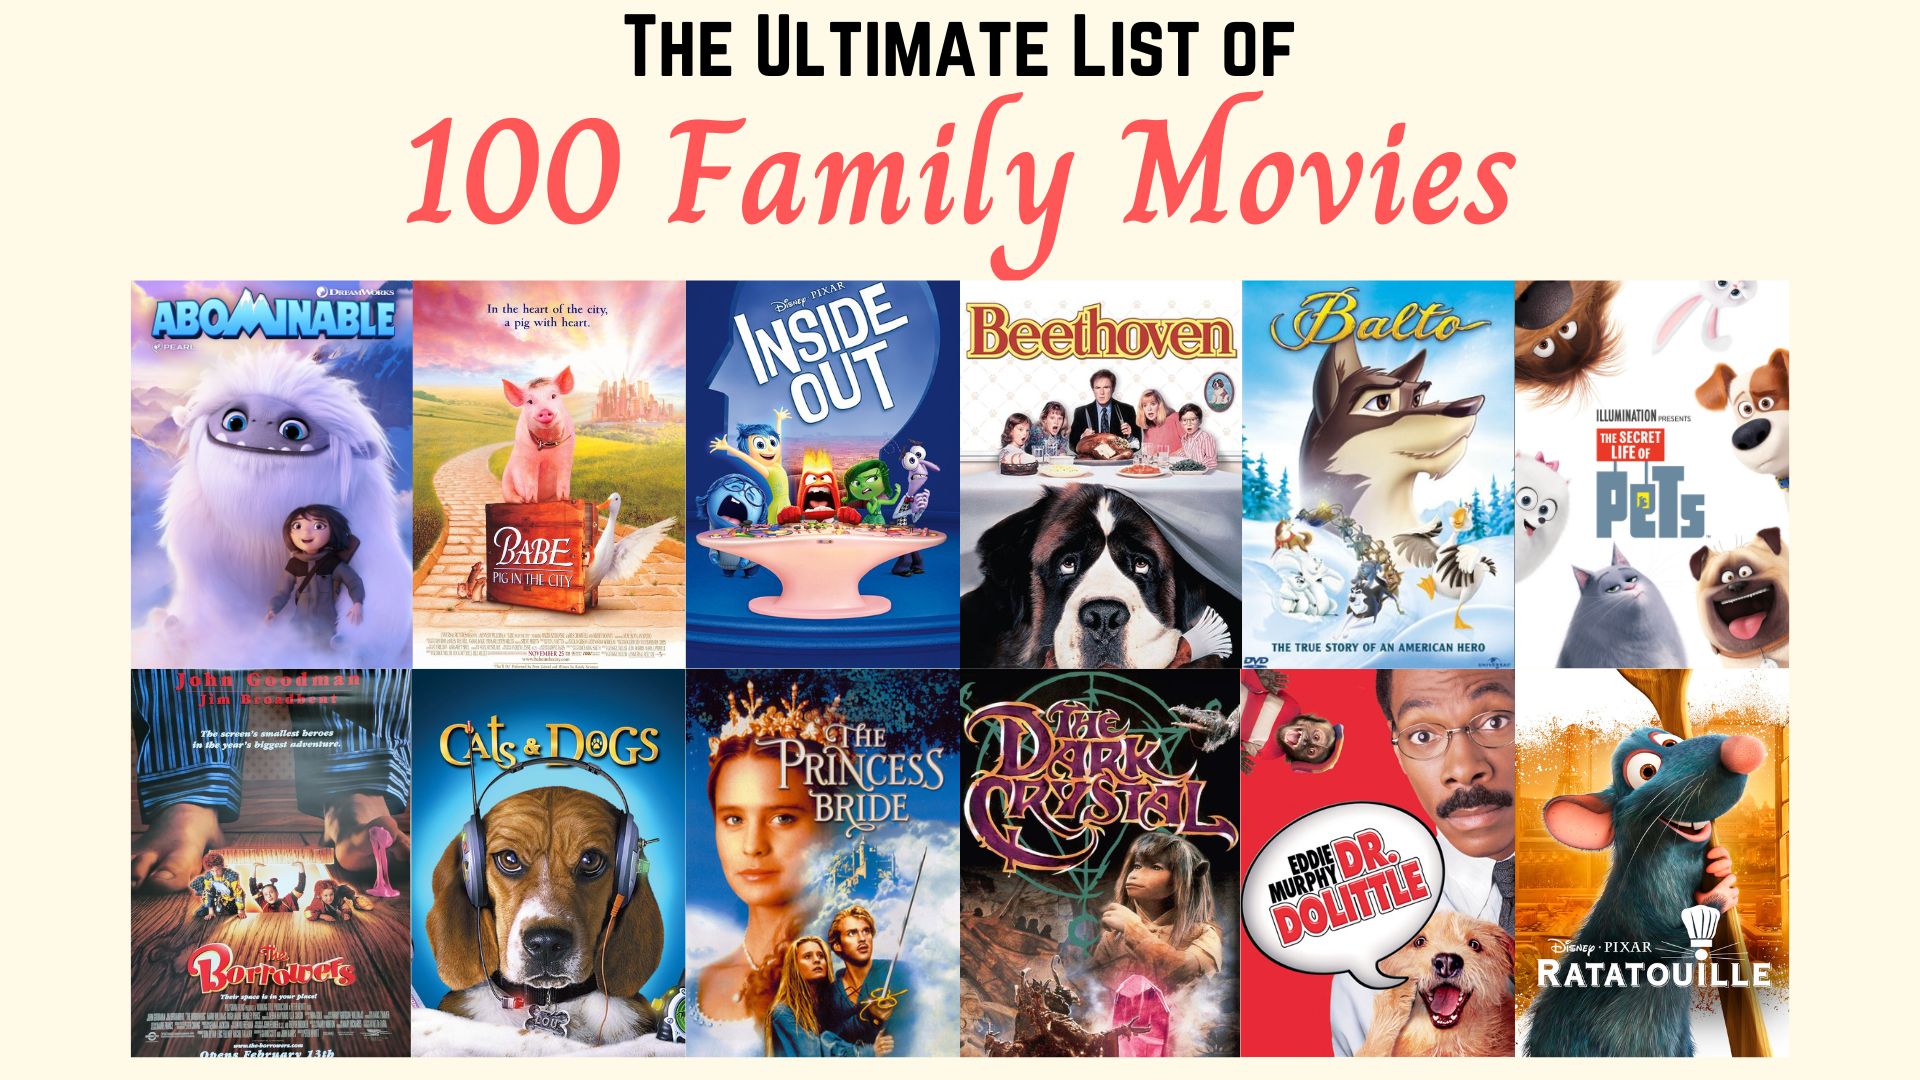 The Ultimate List of 100 Family Movies for Family Movie Night with Kids of All Ages